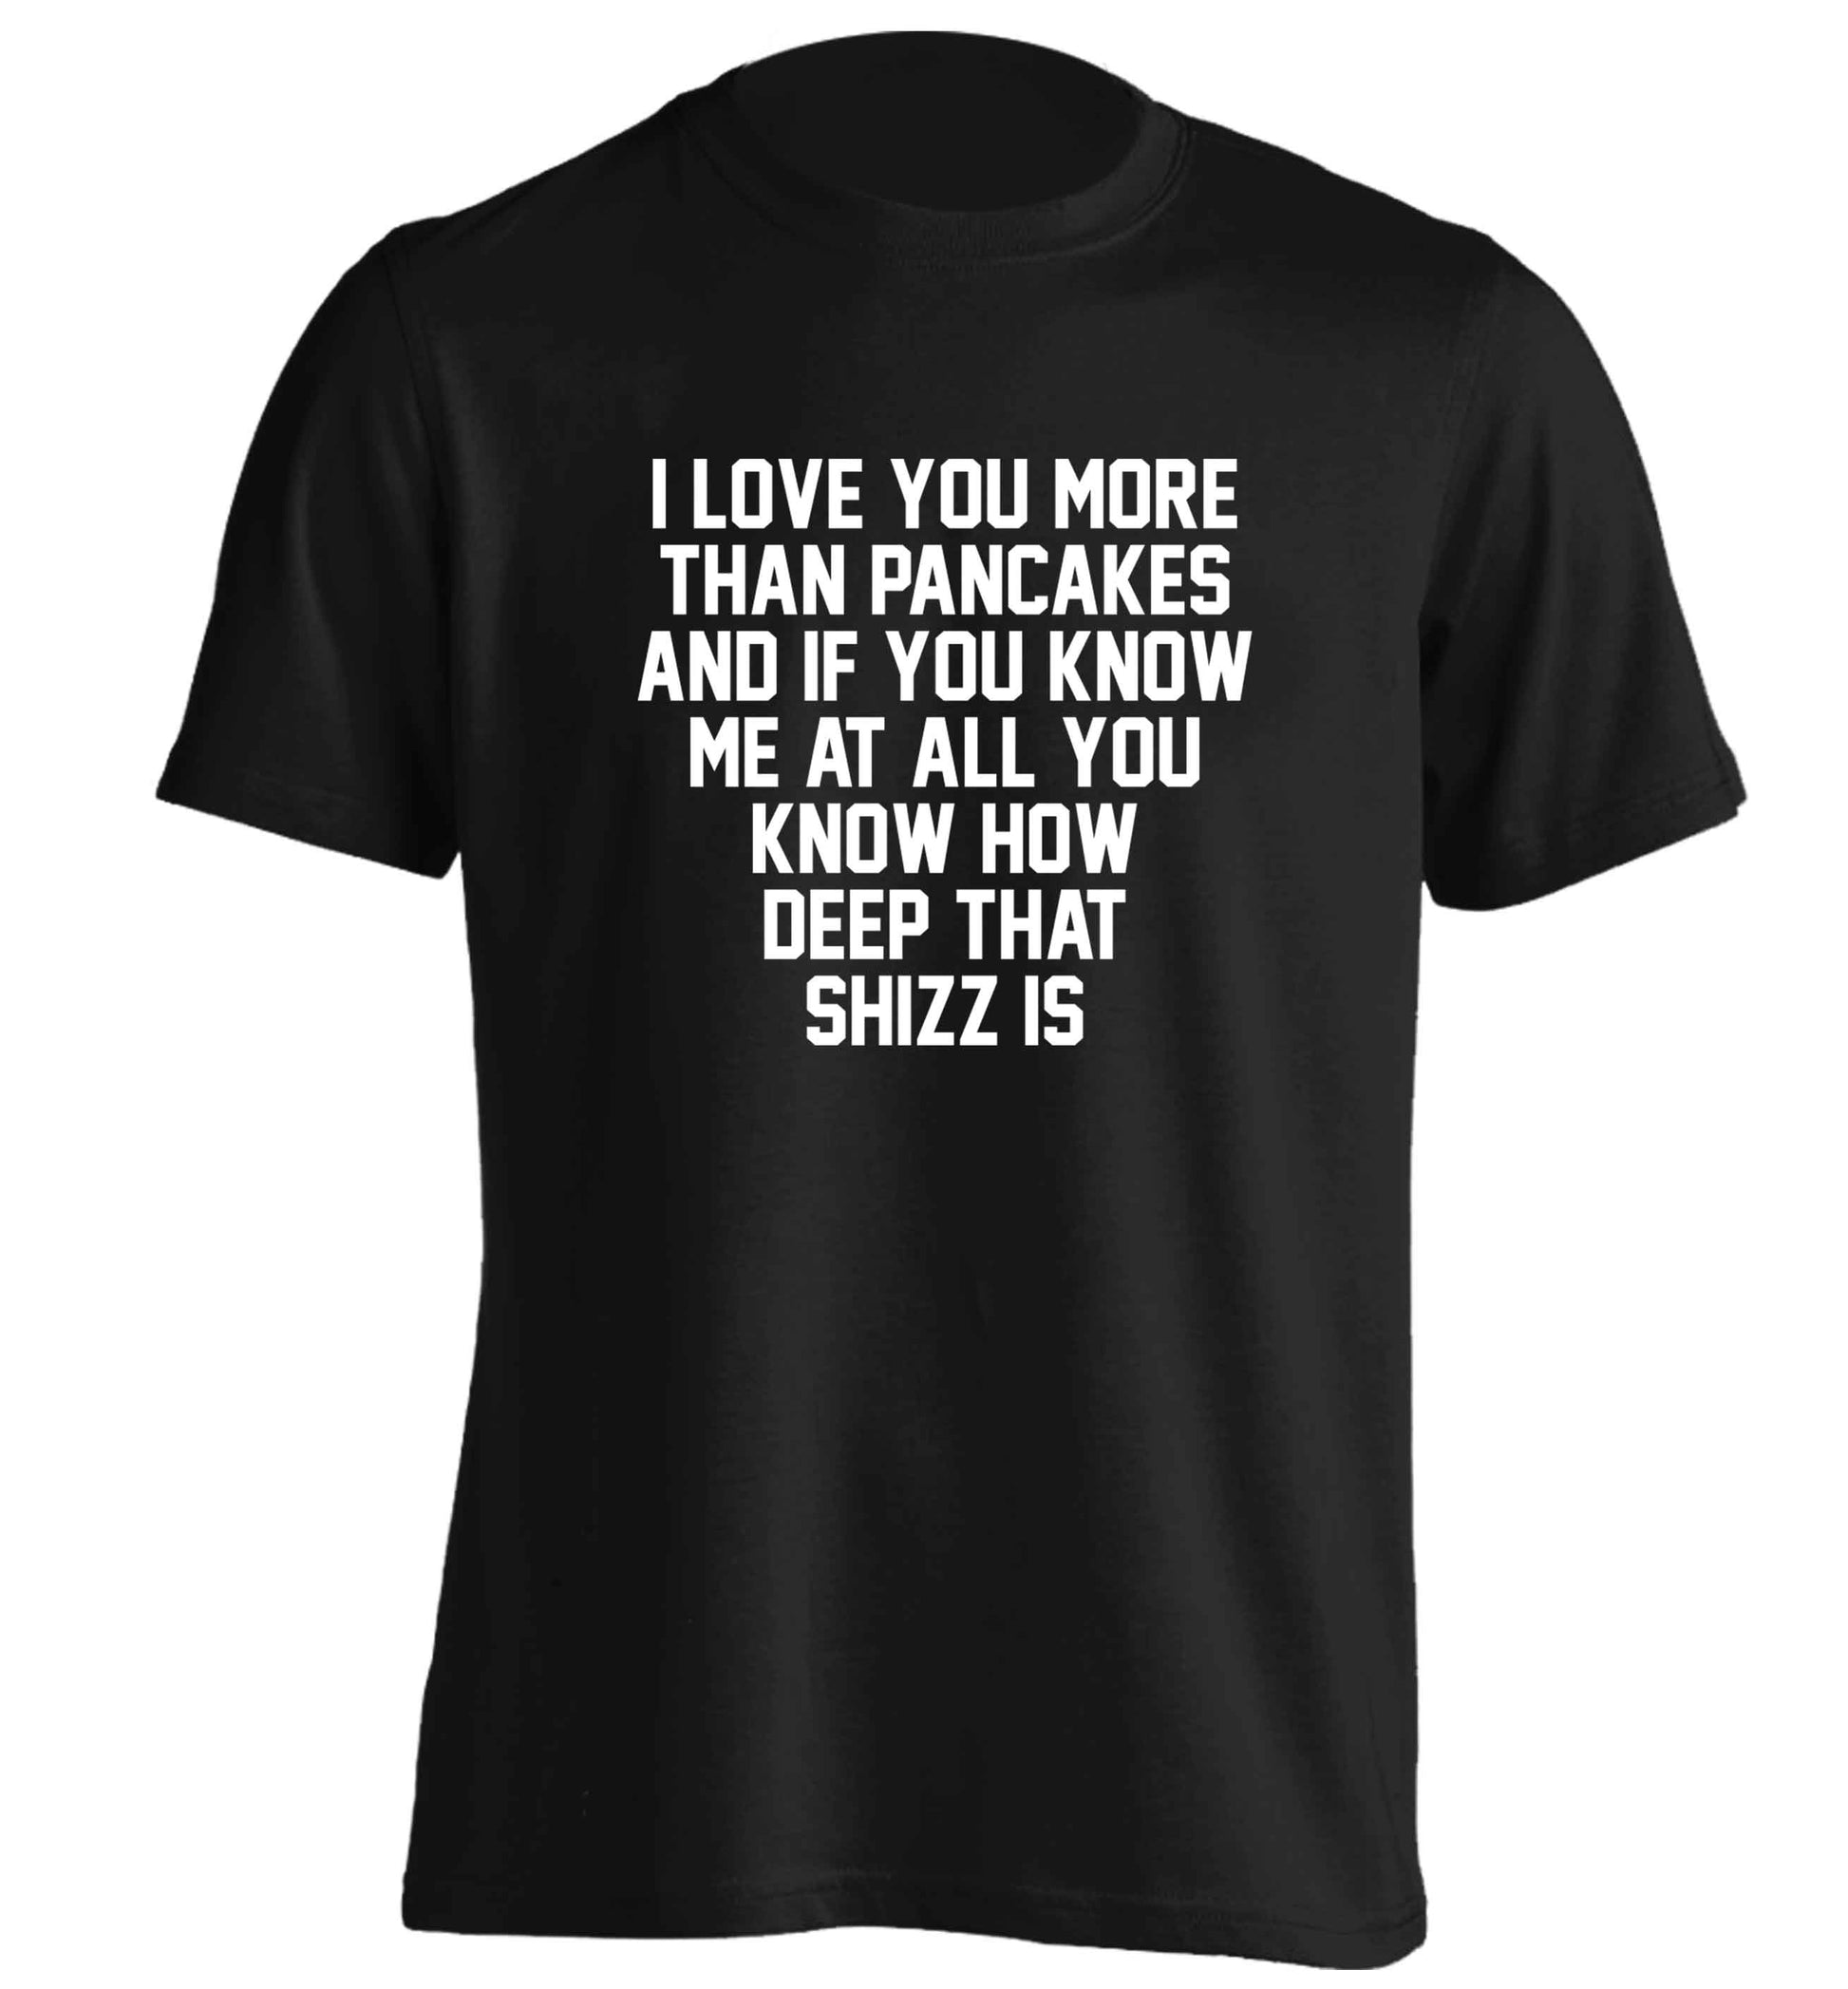 I love you more than pancakes and if you know me at all you know how deep that shizz is adults unisex black Tshirt 2XL